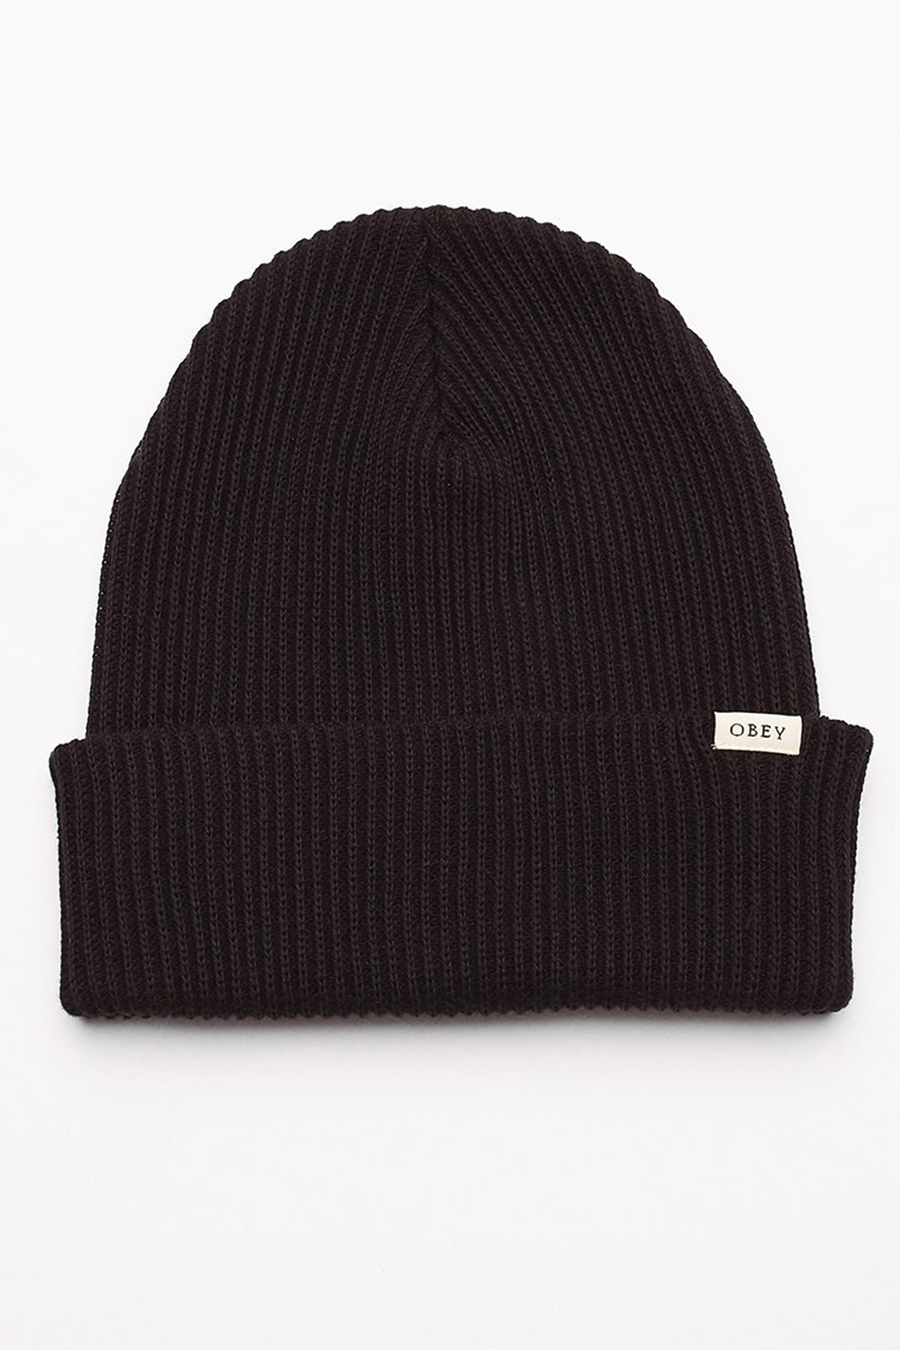 Ideals Organic Beanie | Black - West of Camden - Main Image Number 3 of 4